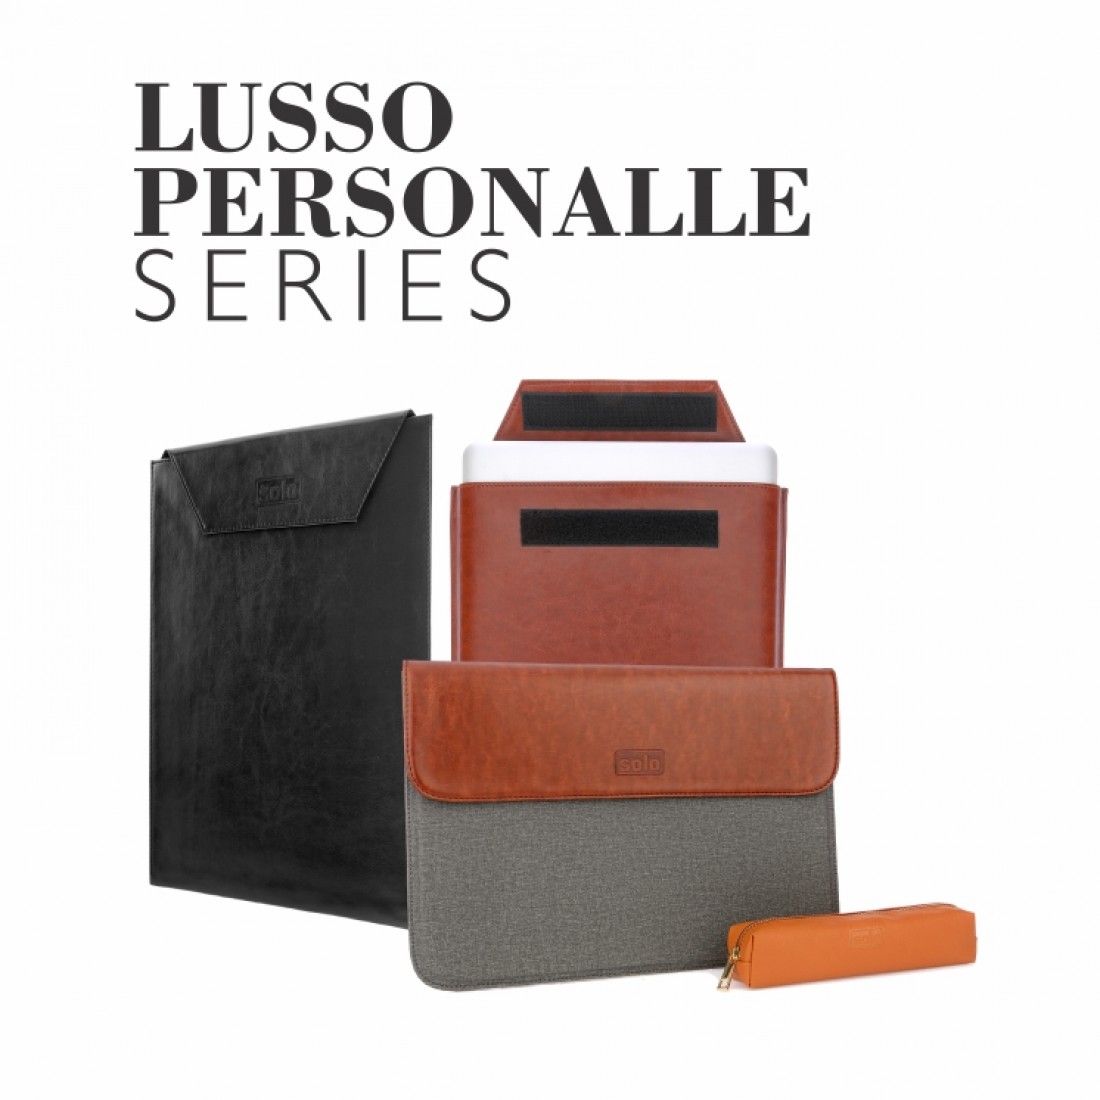 Lusso Personalle